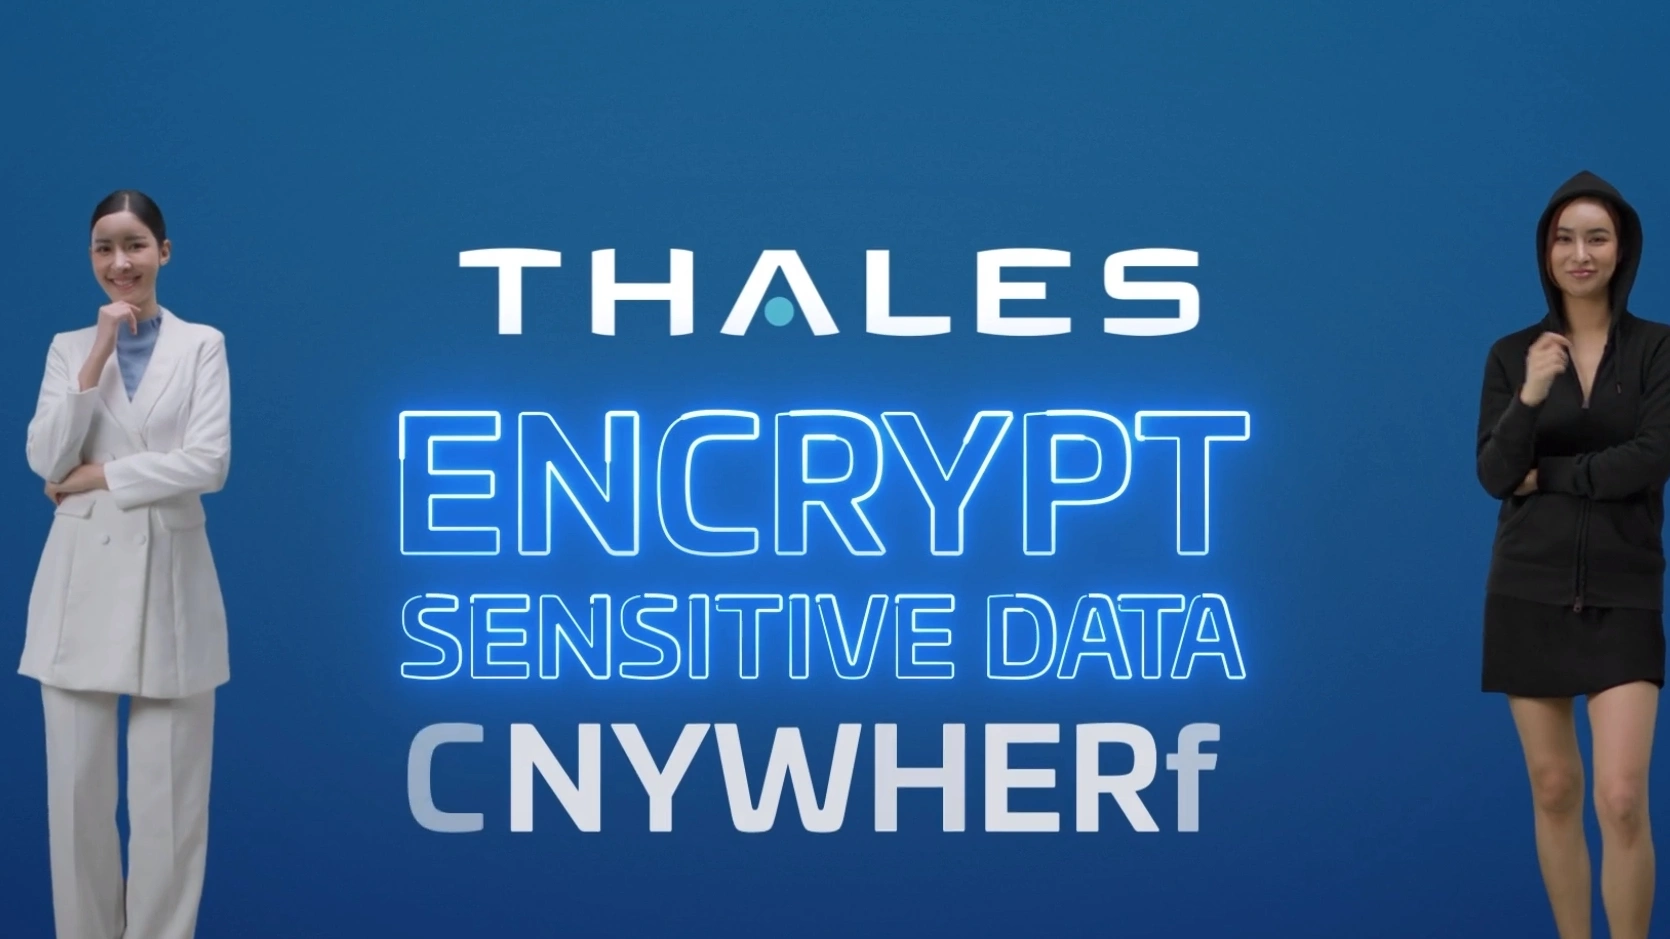 THALES Corporate Video